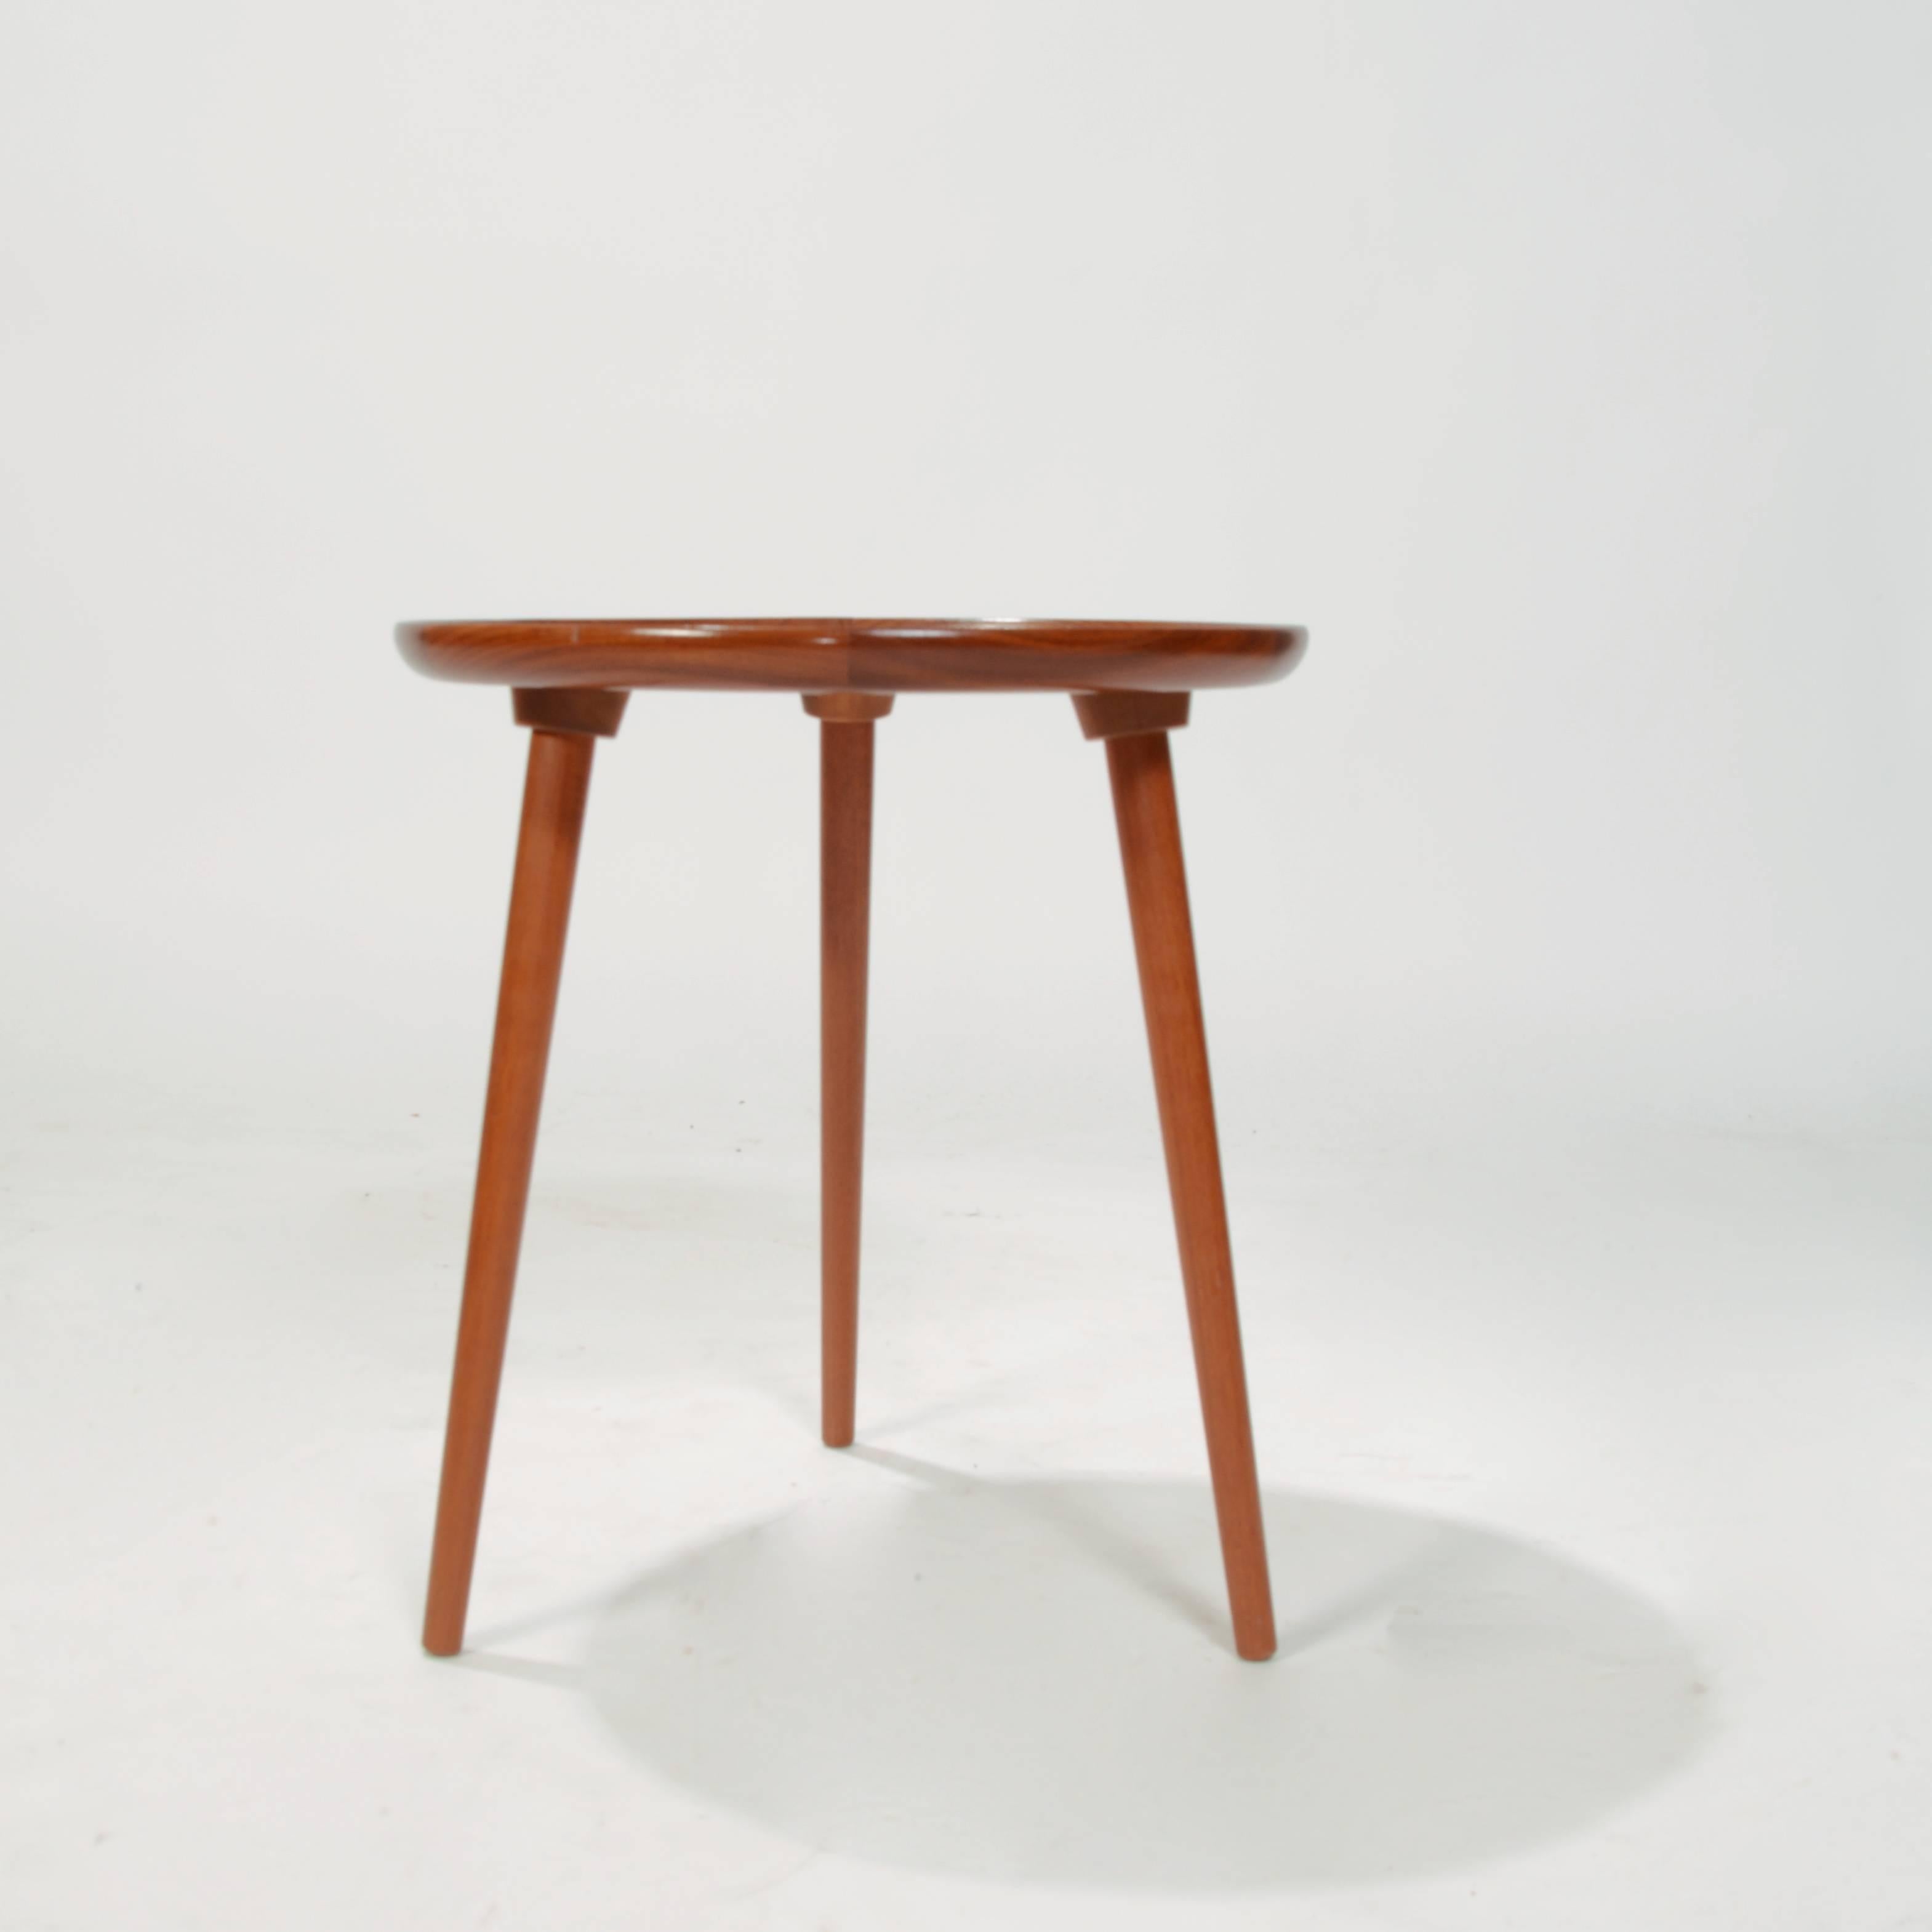 This is a great little tri-legged table by Selig of Denmark.  Recently imported.  